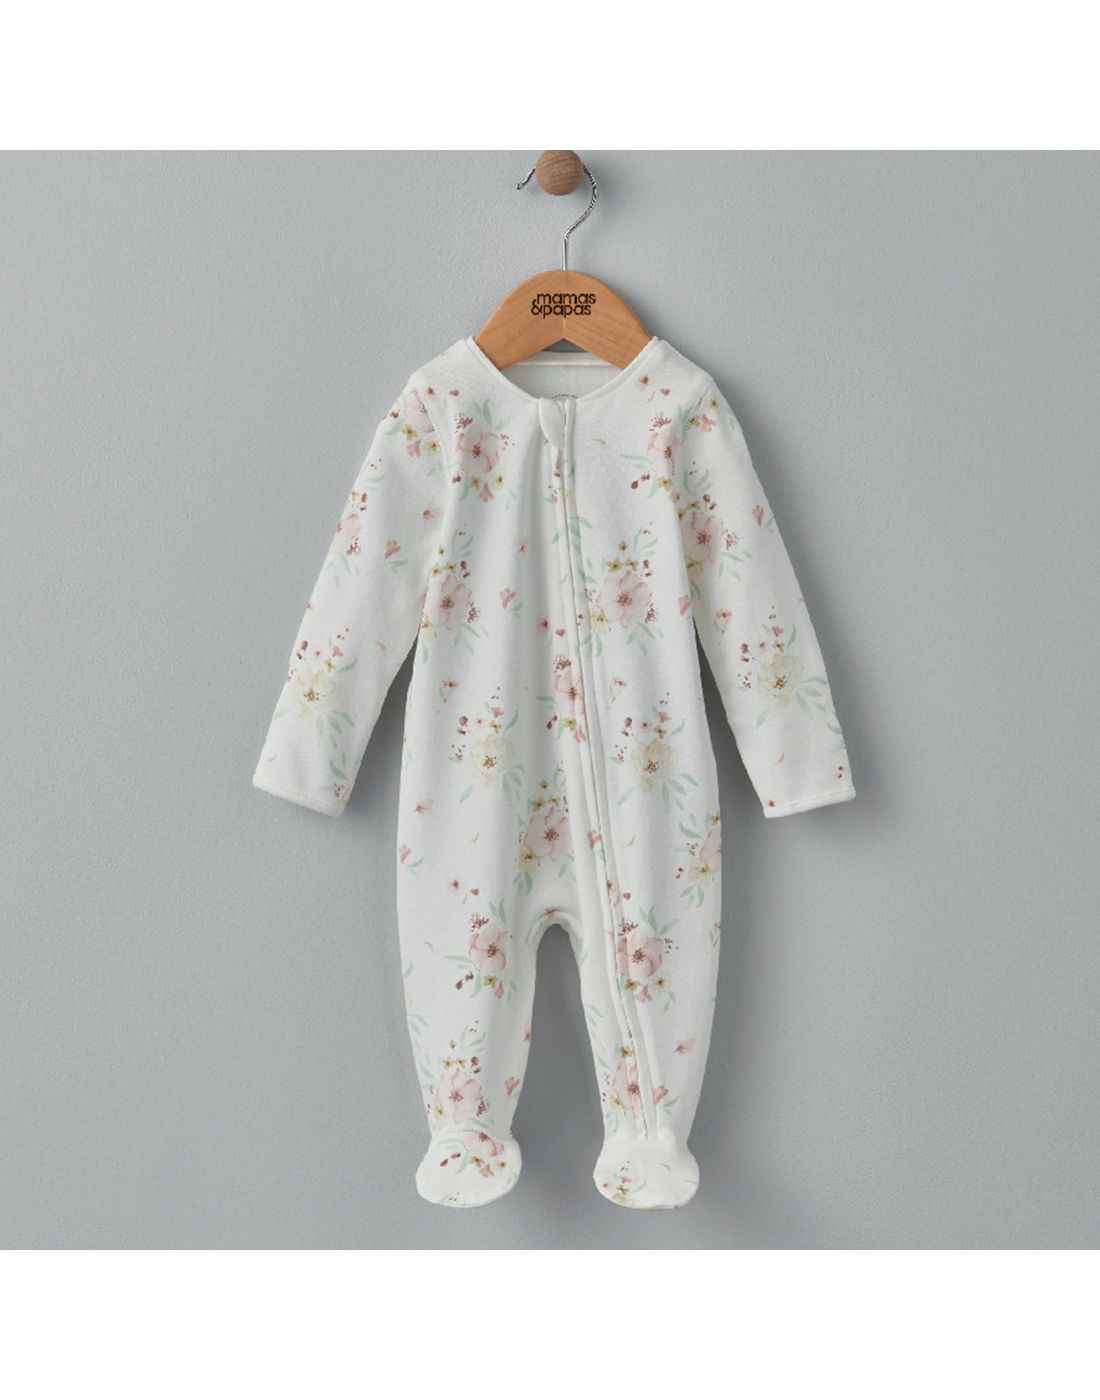 Mamas & Papas Floral Zip All-in-One